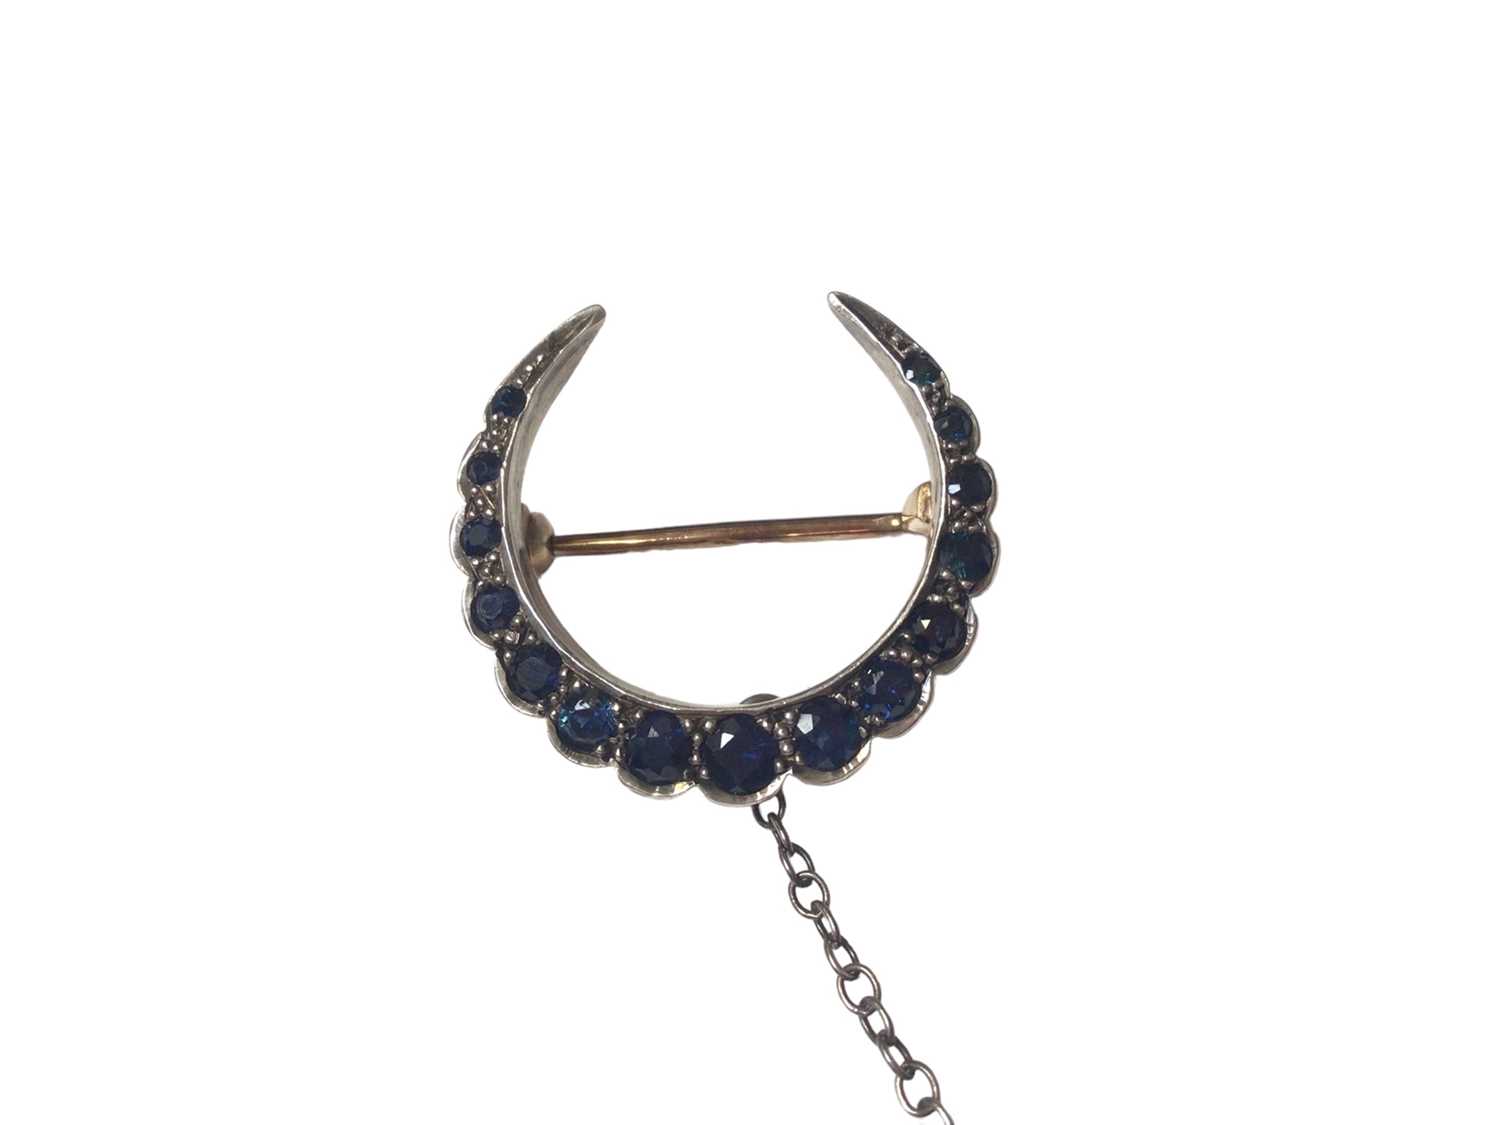 Victorian sapphire crescent brooch with fifteen graduated round mixed cut blue sapphires in a yellow